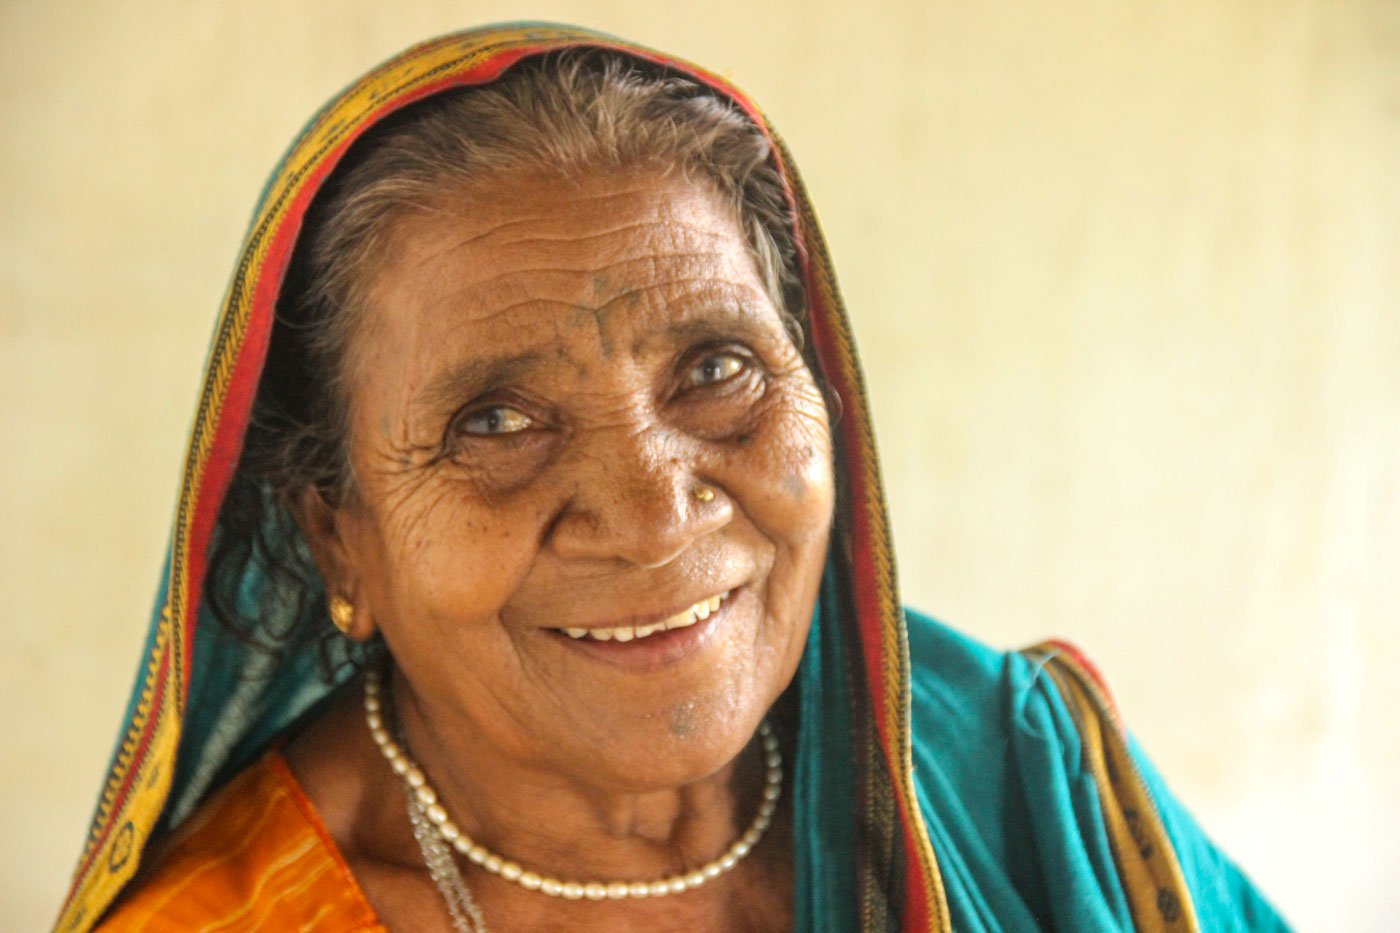 Ropi, Jaitadehi village's last remaining traditional dai, says she must have delivered at least 500-600 babies